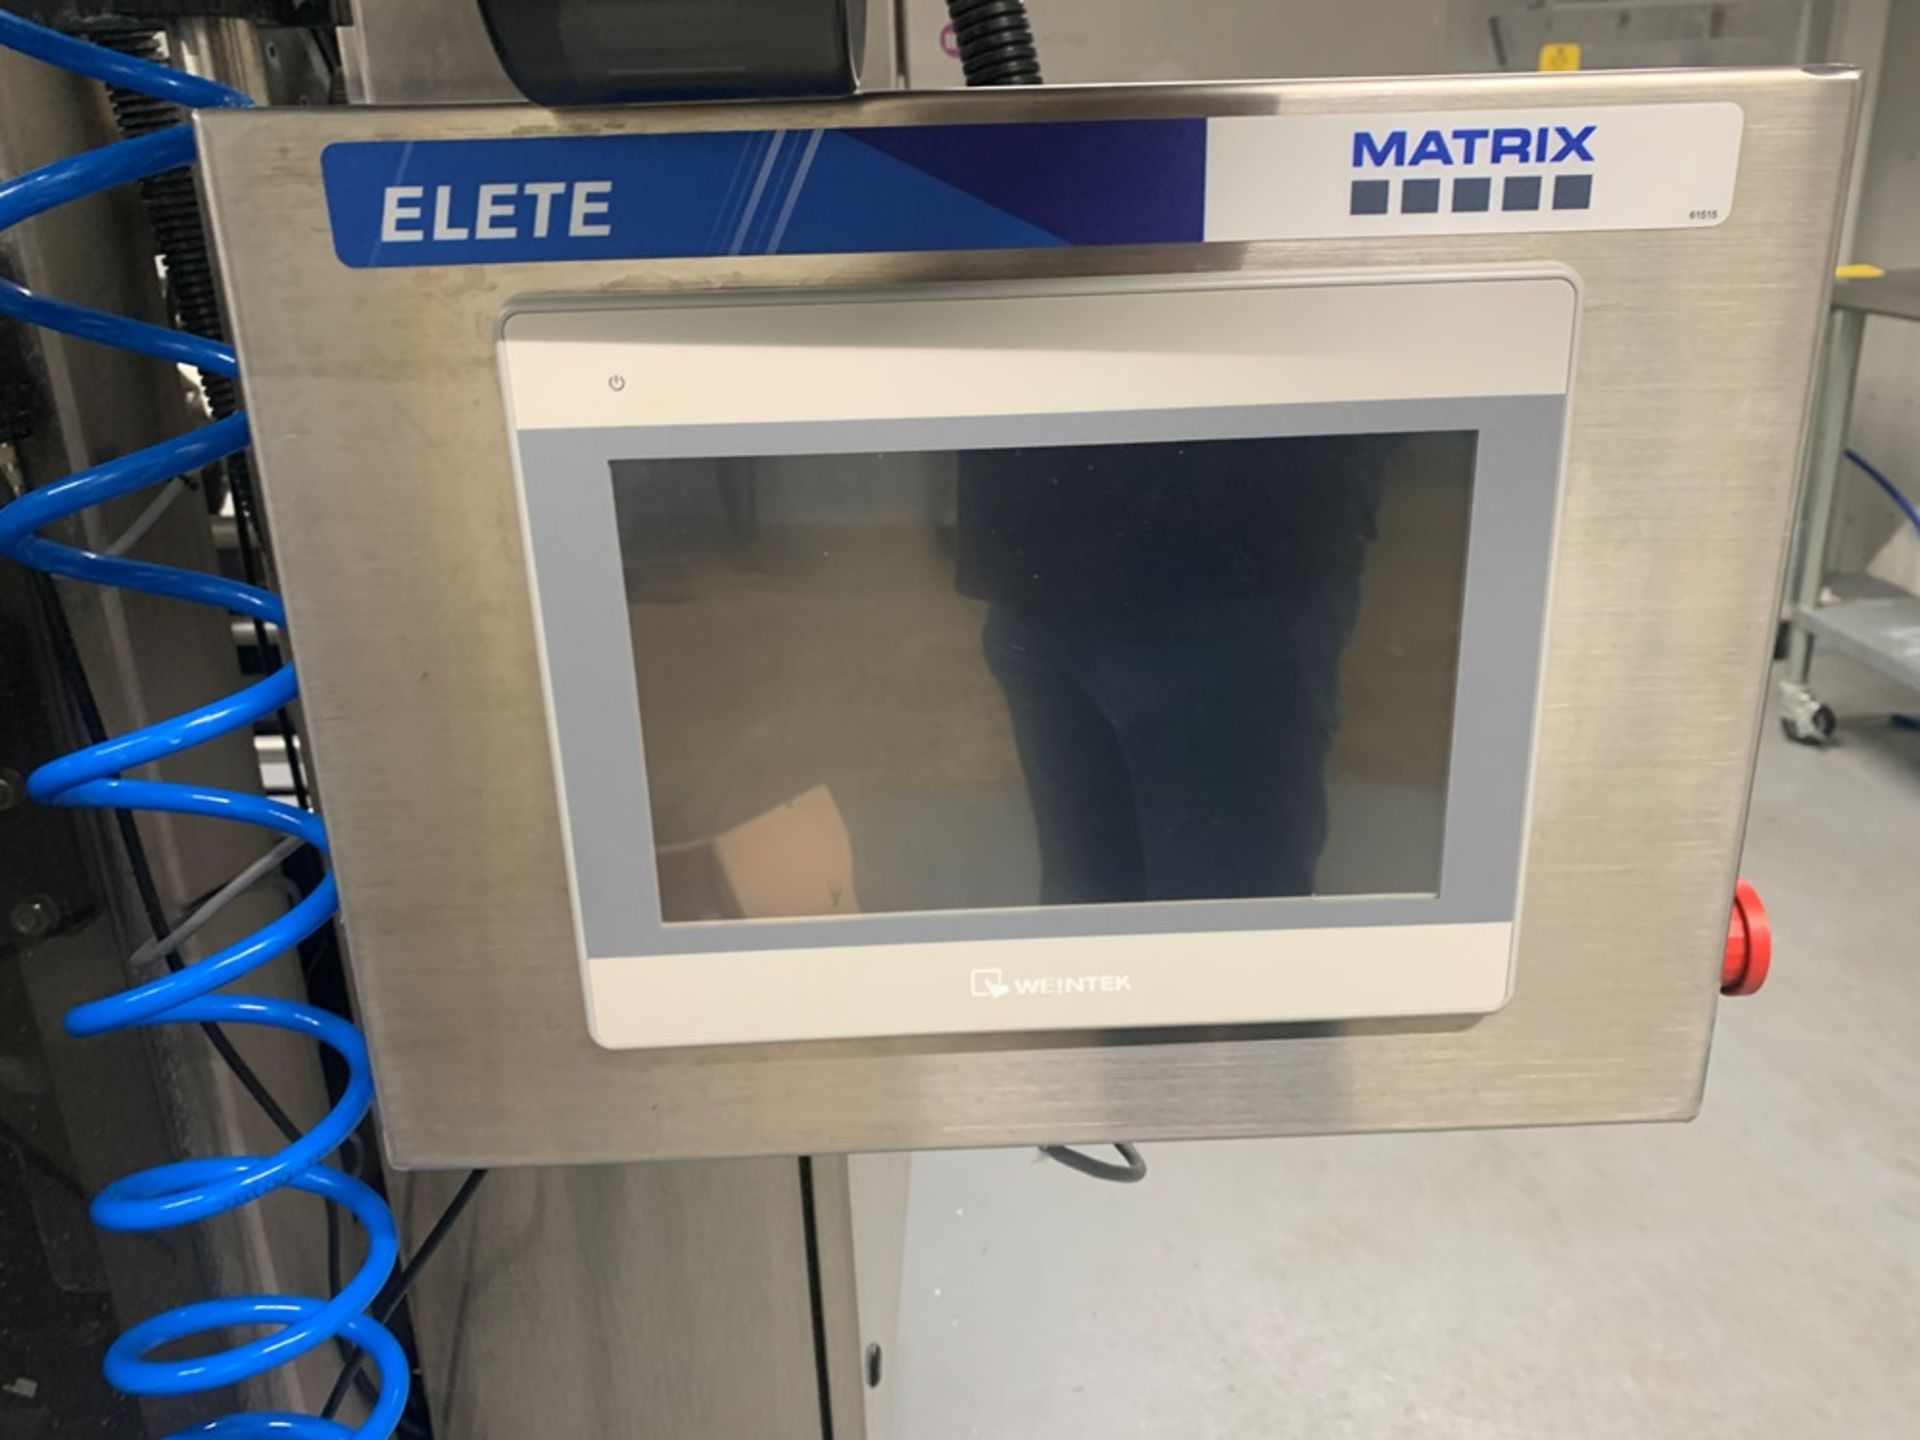 Matrix Mdl. Elite Bagger Vertical Form Fill and Seal, Ser. #CB18562, 230 volts, stainless steel - Image 4 of 27